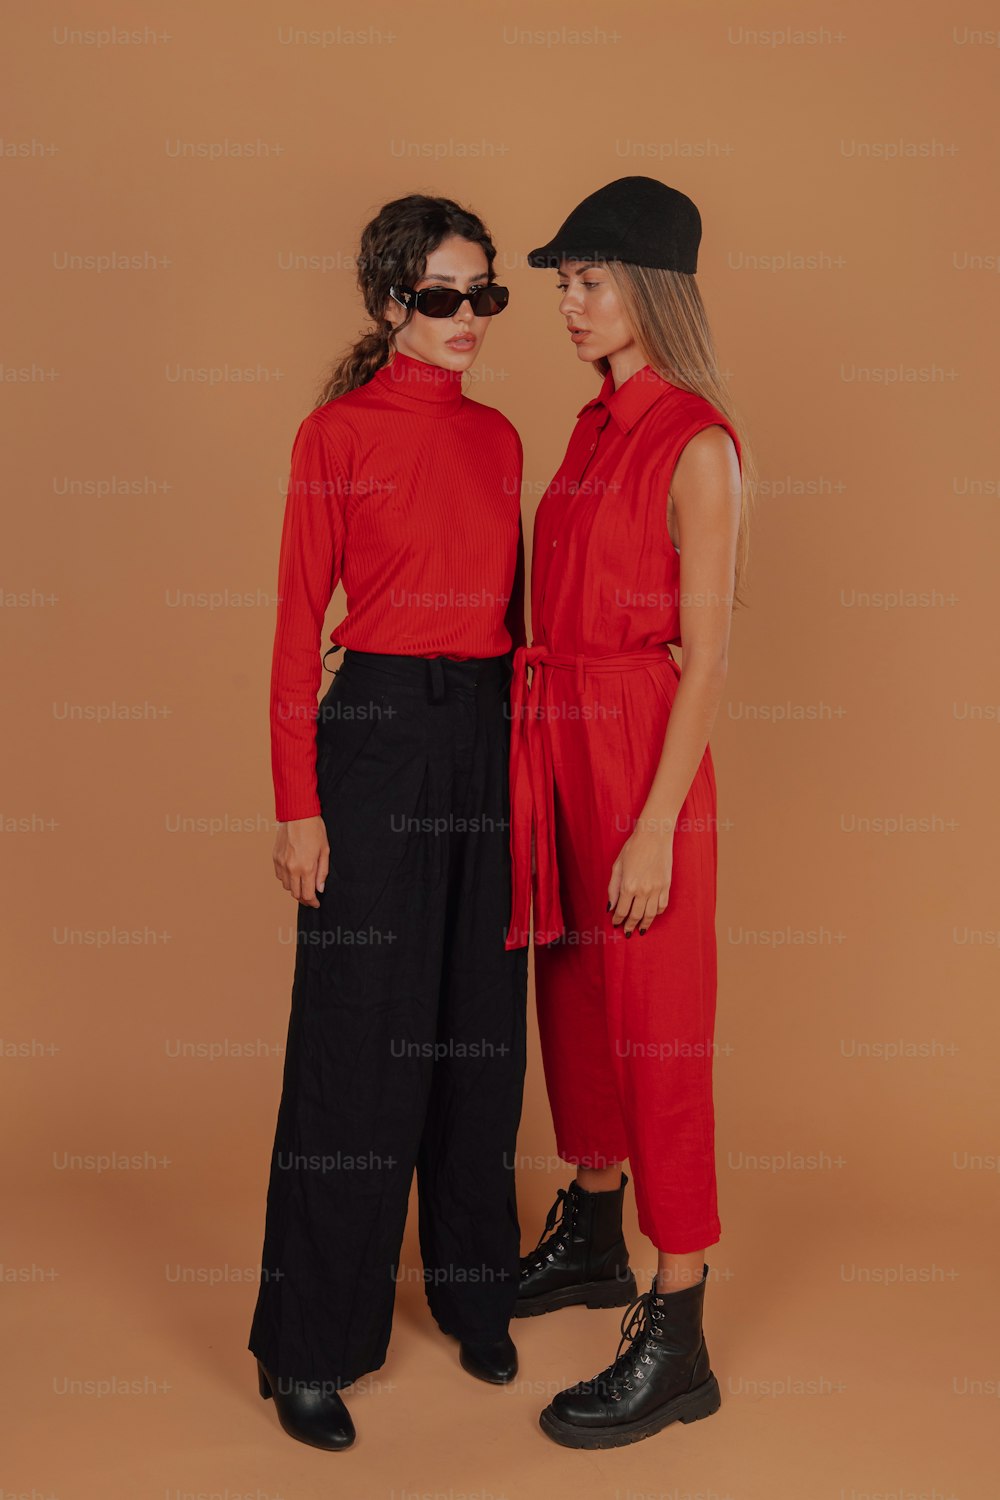 two women standing next to each other wearing red shirts and black pants